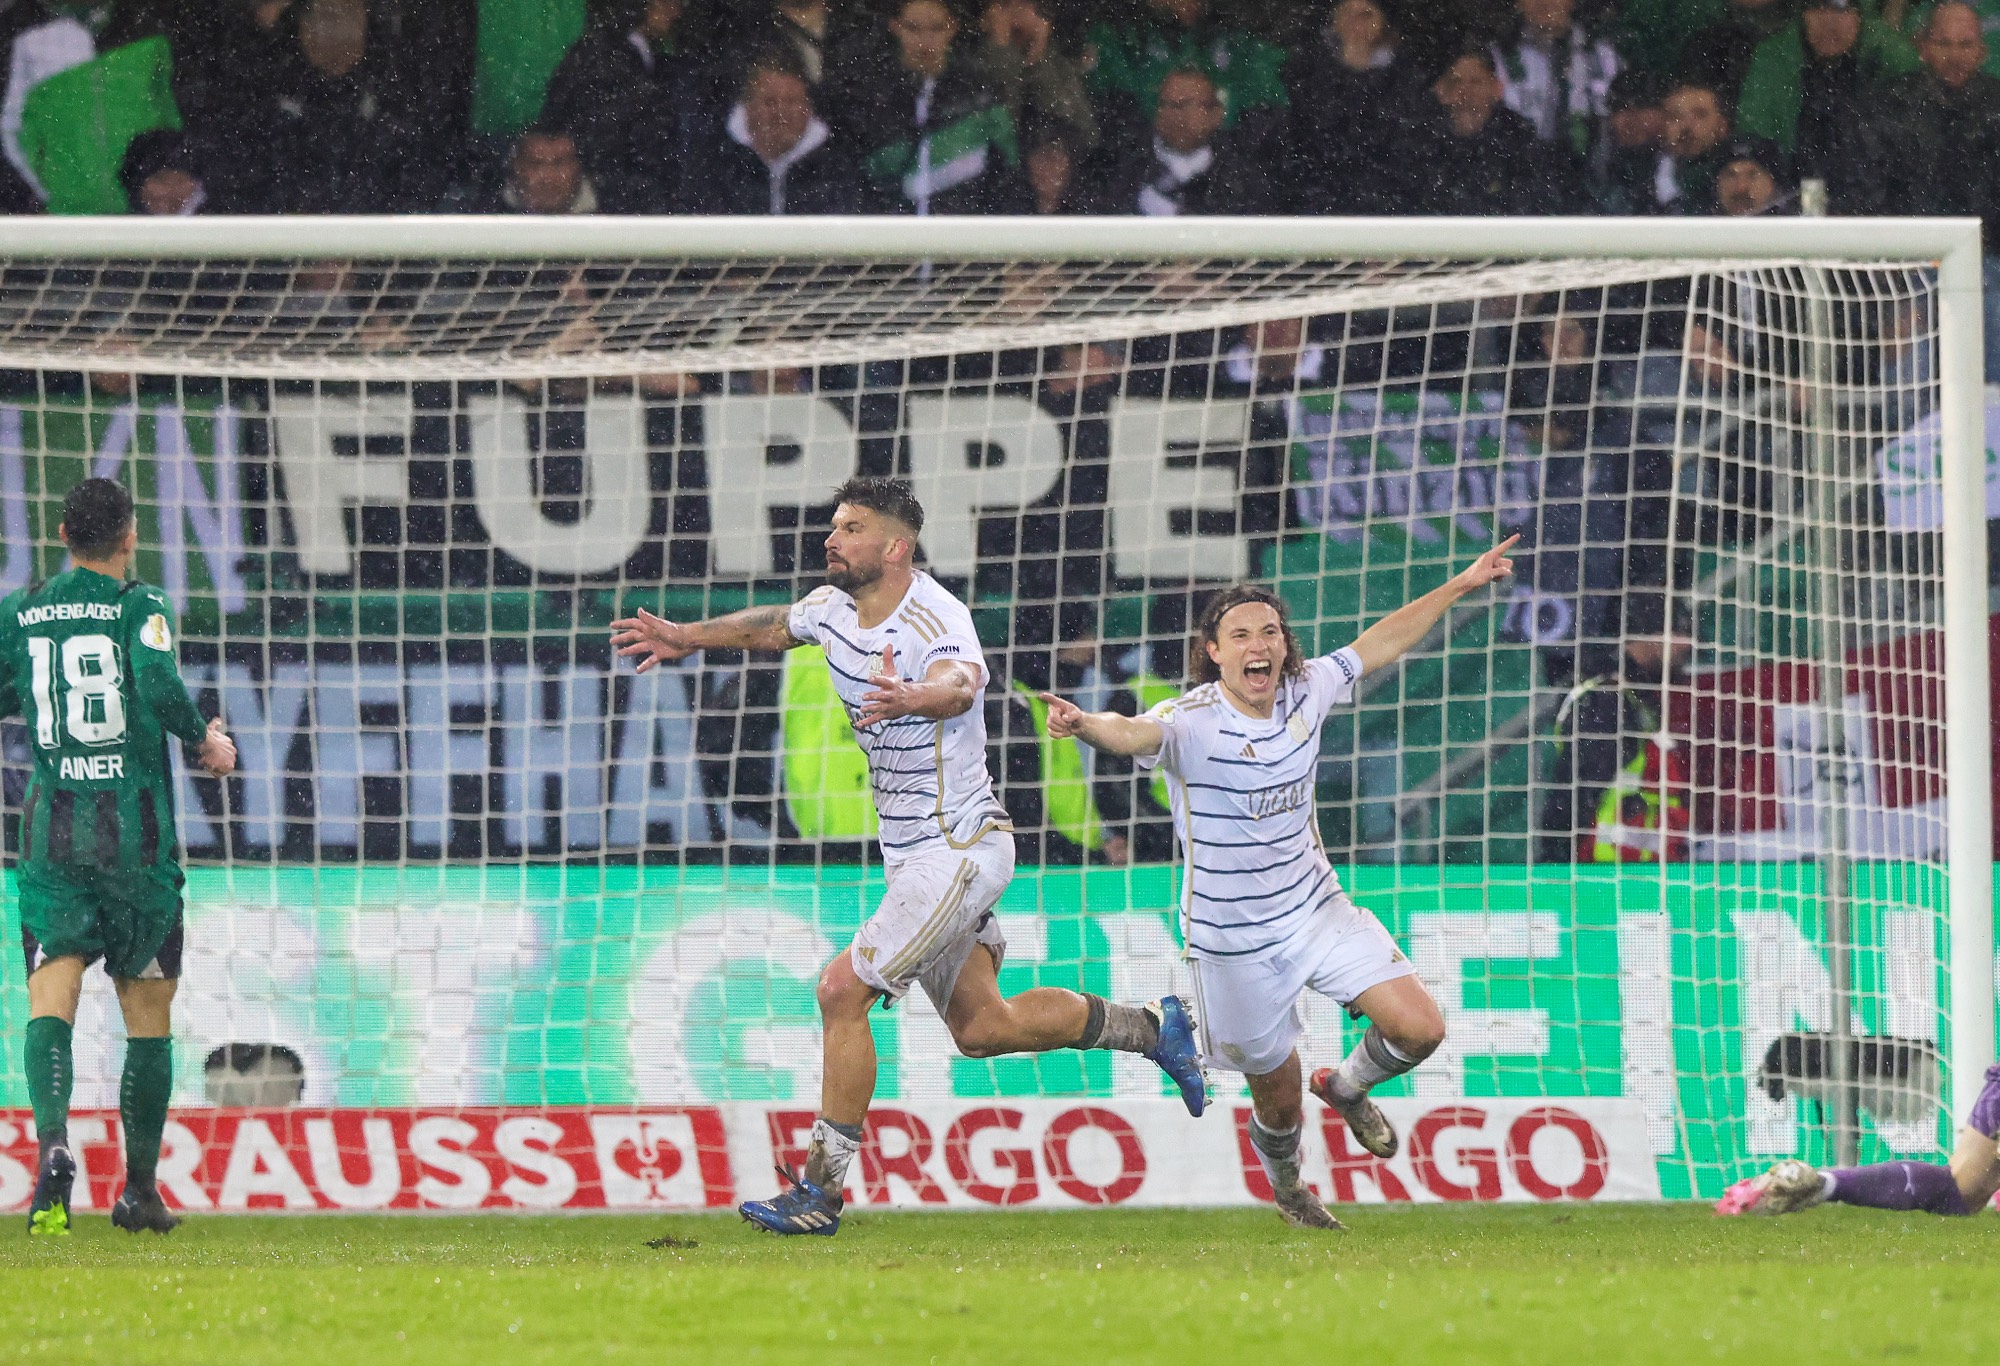 Kai Brünker of 1. FC Saarbrücken (C) celebrates after scoring his teams second goal during the DFB cup quarterfinal match between 1. FC Saarbrücken and Borussia Mönchengladbach at Ludwigsparkstadion on March 12, 2024 in Saarbruecken, Germany. (Photo by Ralf Ibing - firo sportphoto/Getty Images)